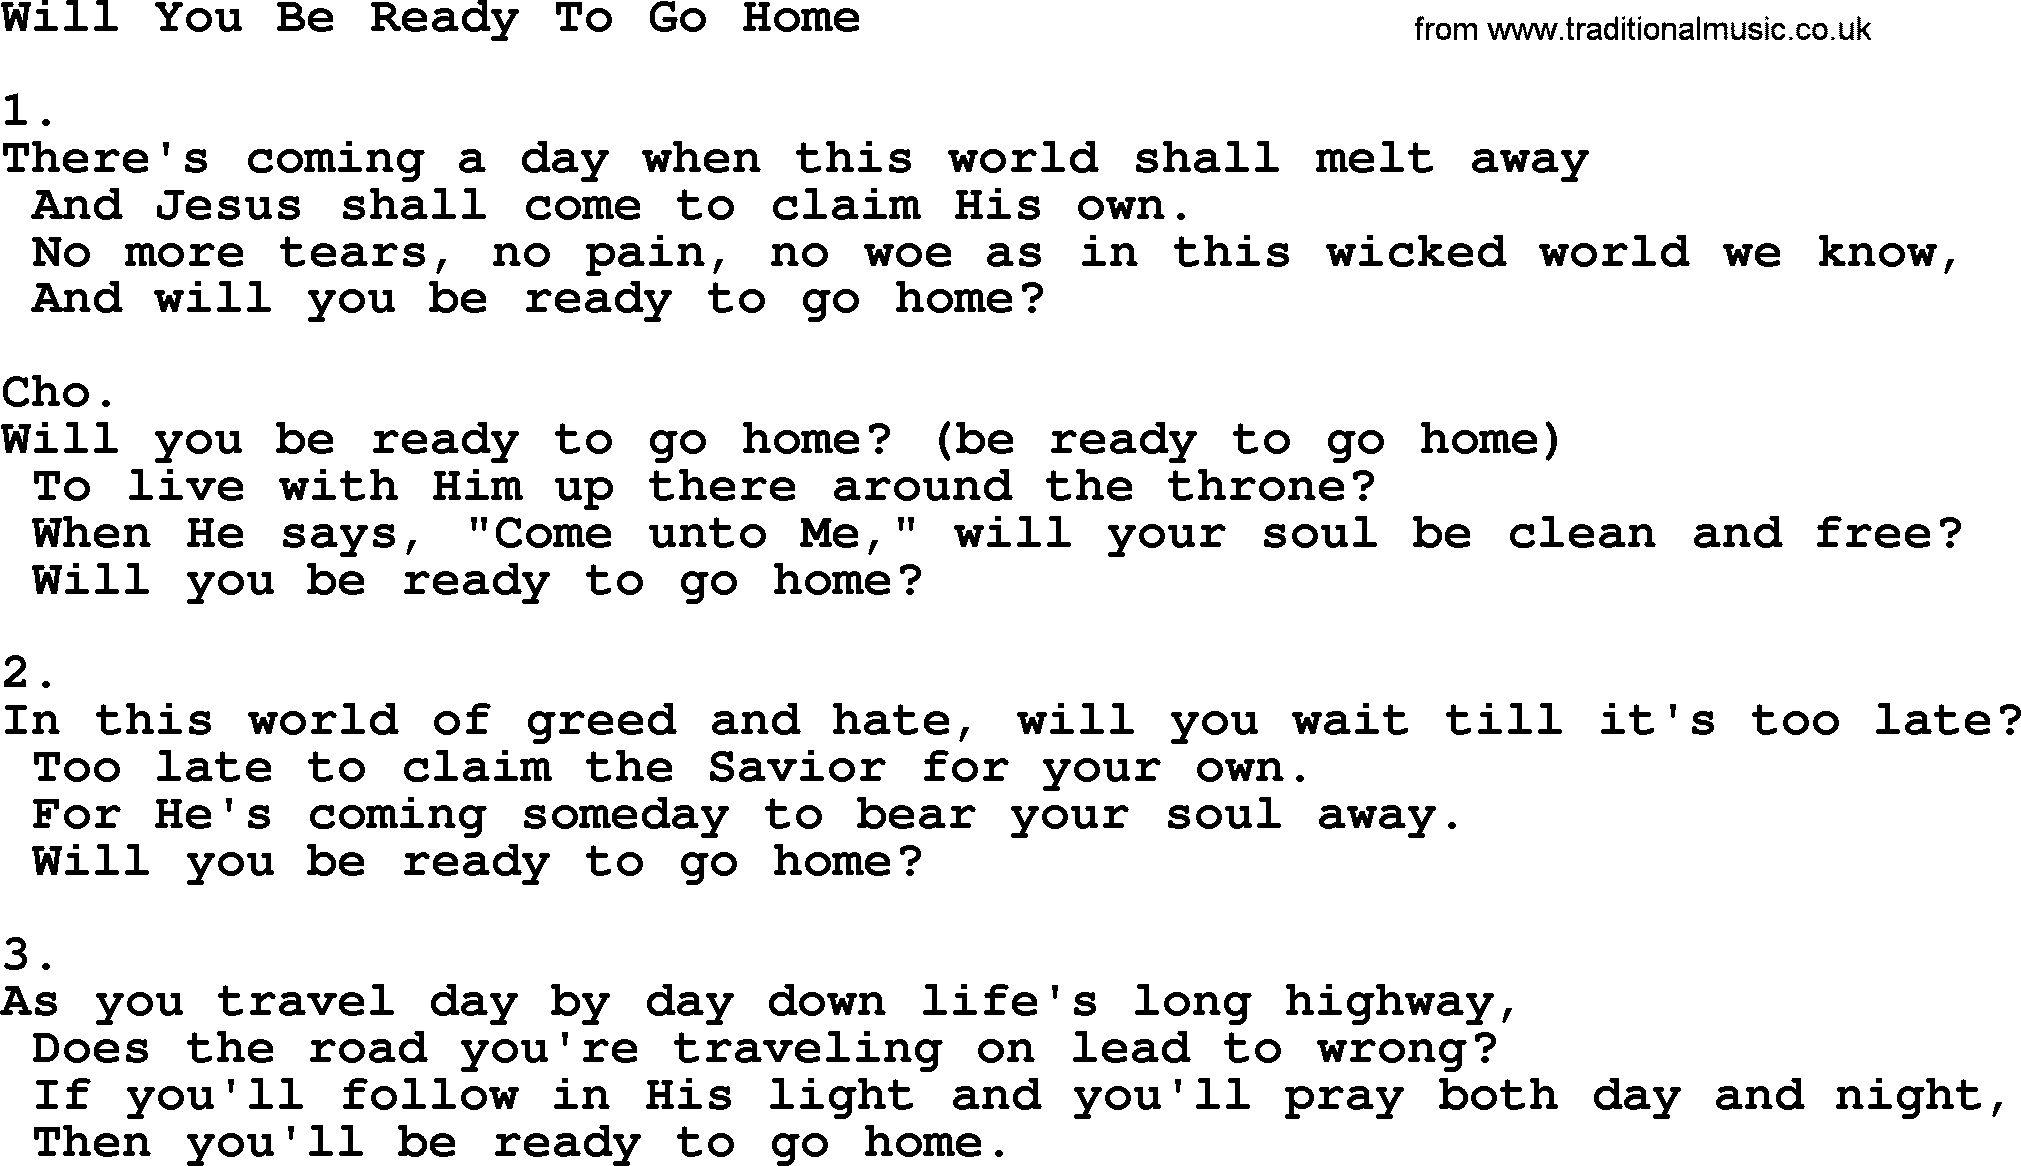 Apostolic & Pentecostal Hymns and Songs, Hymn: Will You Be Ready To Go Home lyrics and PDF